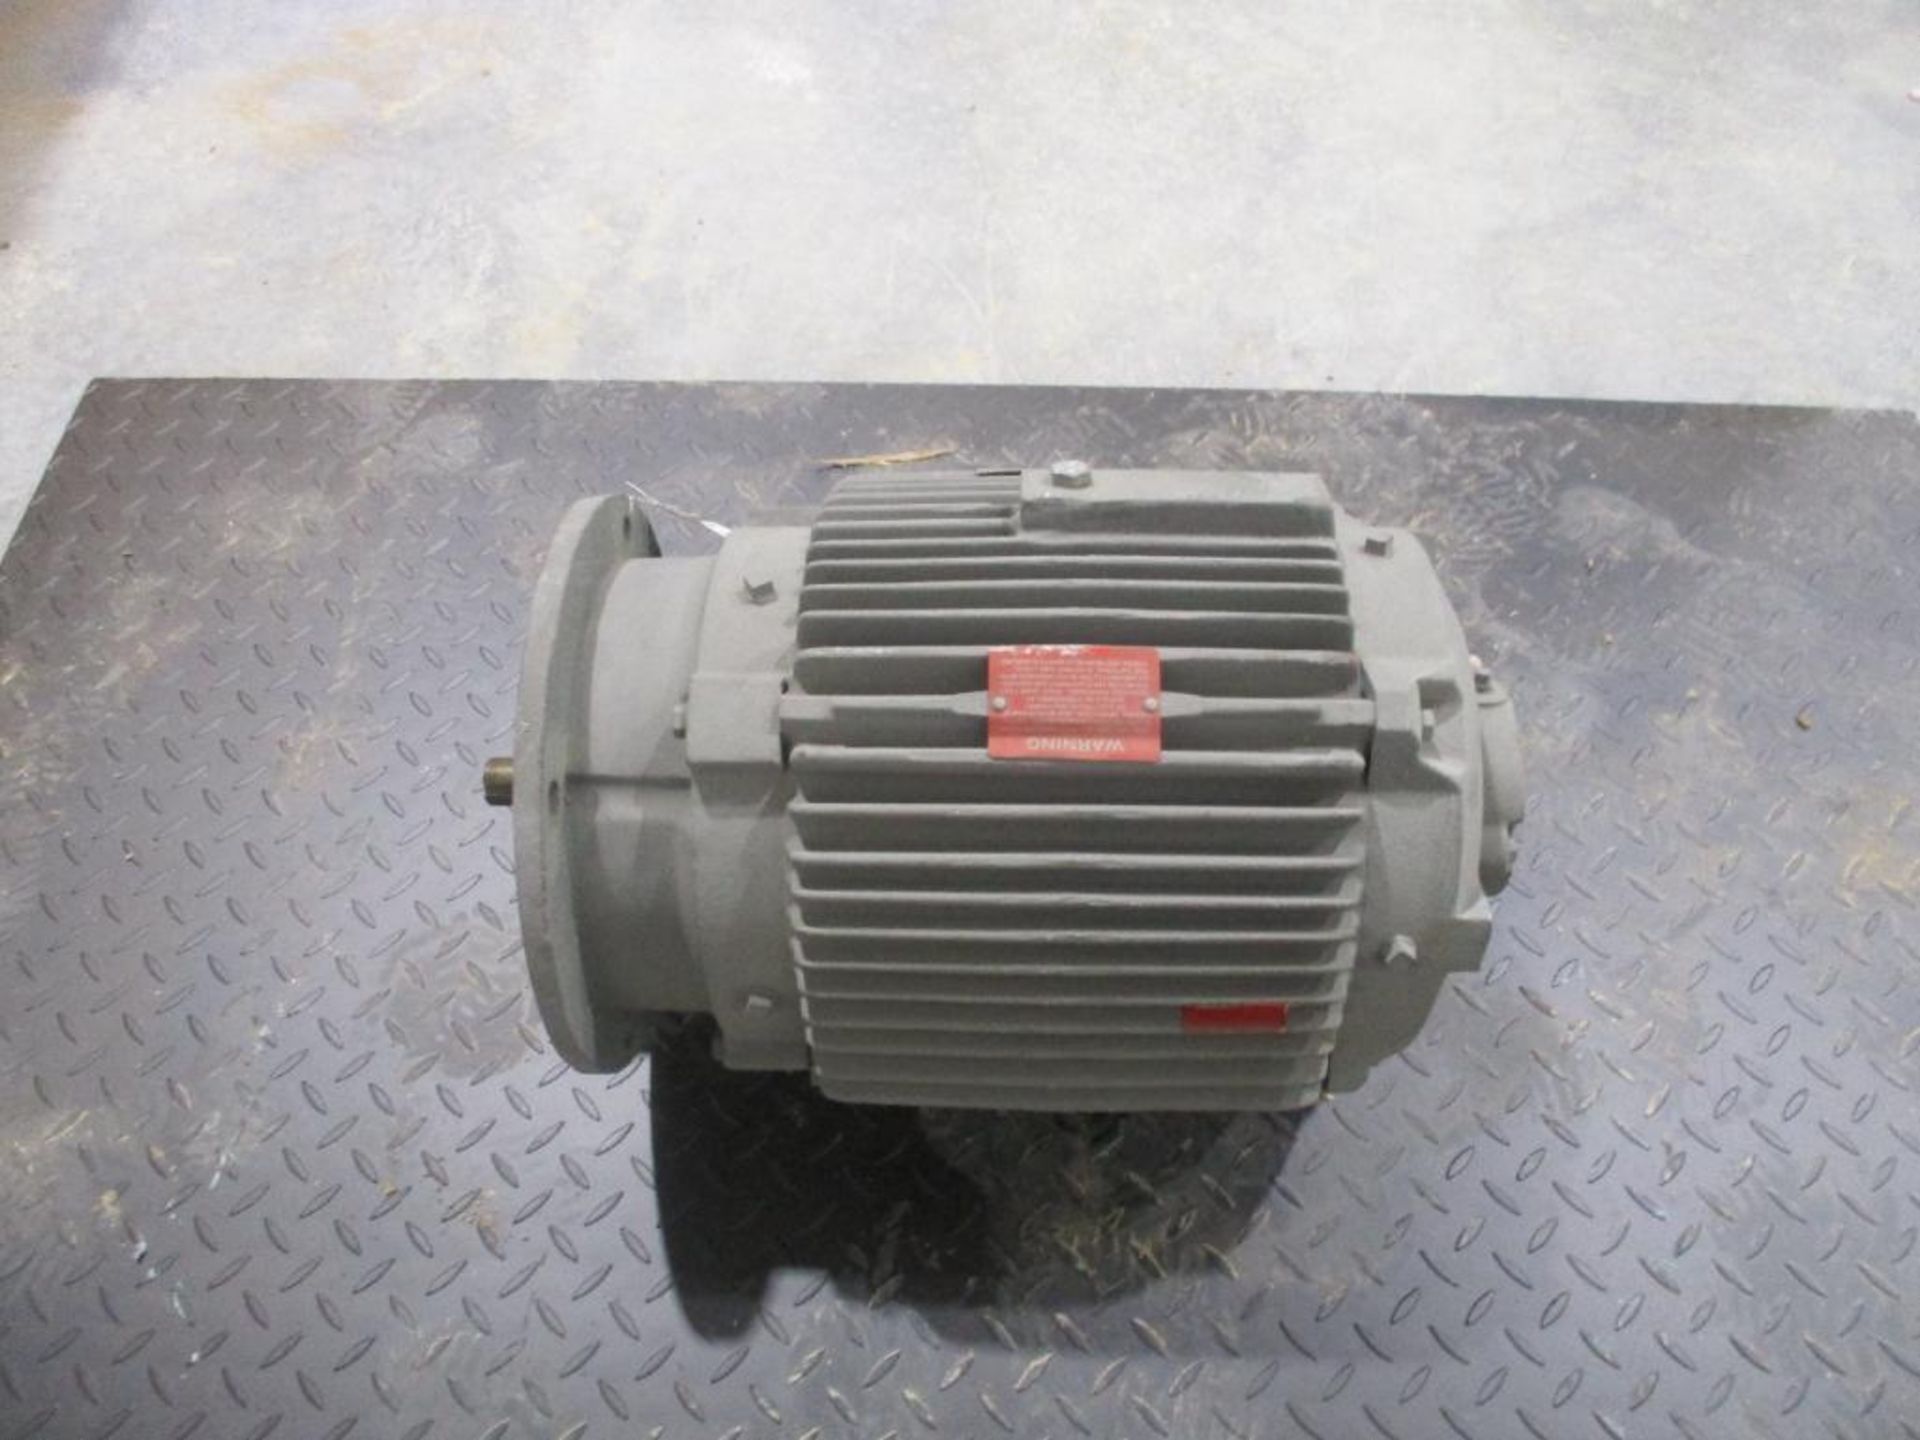 LIMITORQUE 3 PHASE 13.0HP 3420RPM 256TY FRAME A/C MOTOR P/N SYZ00596-A1-TS, 287# lbs (There will be - Bild 3 aus 5